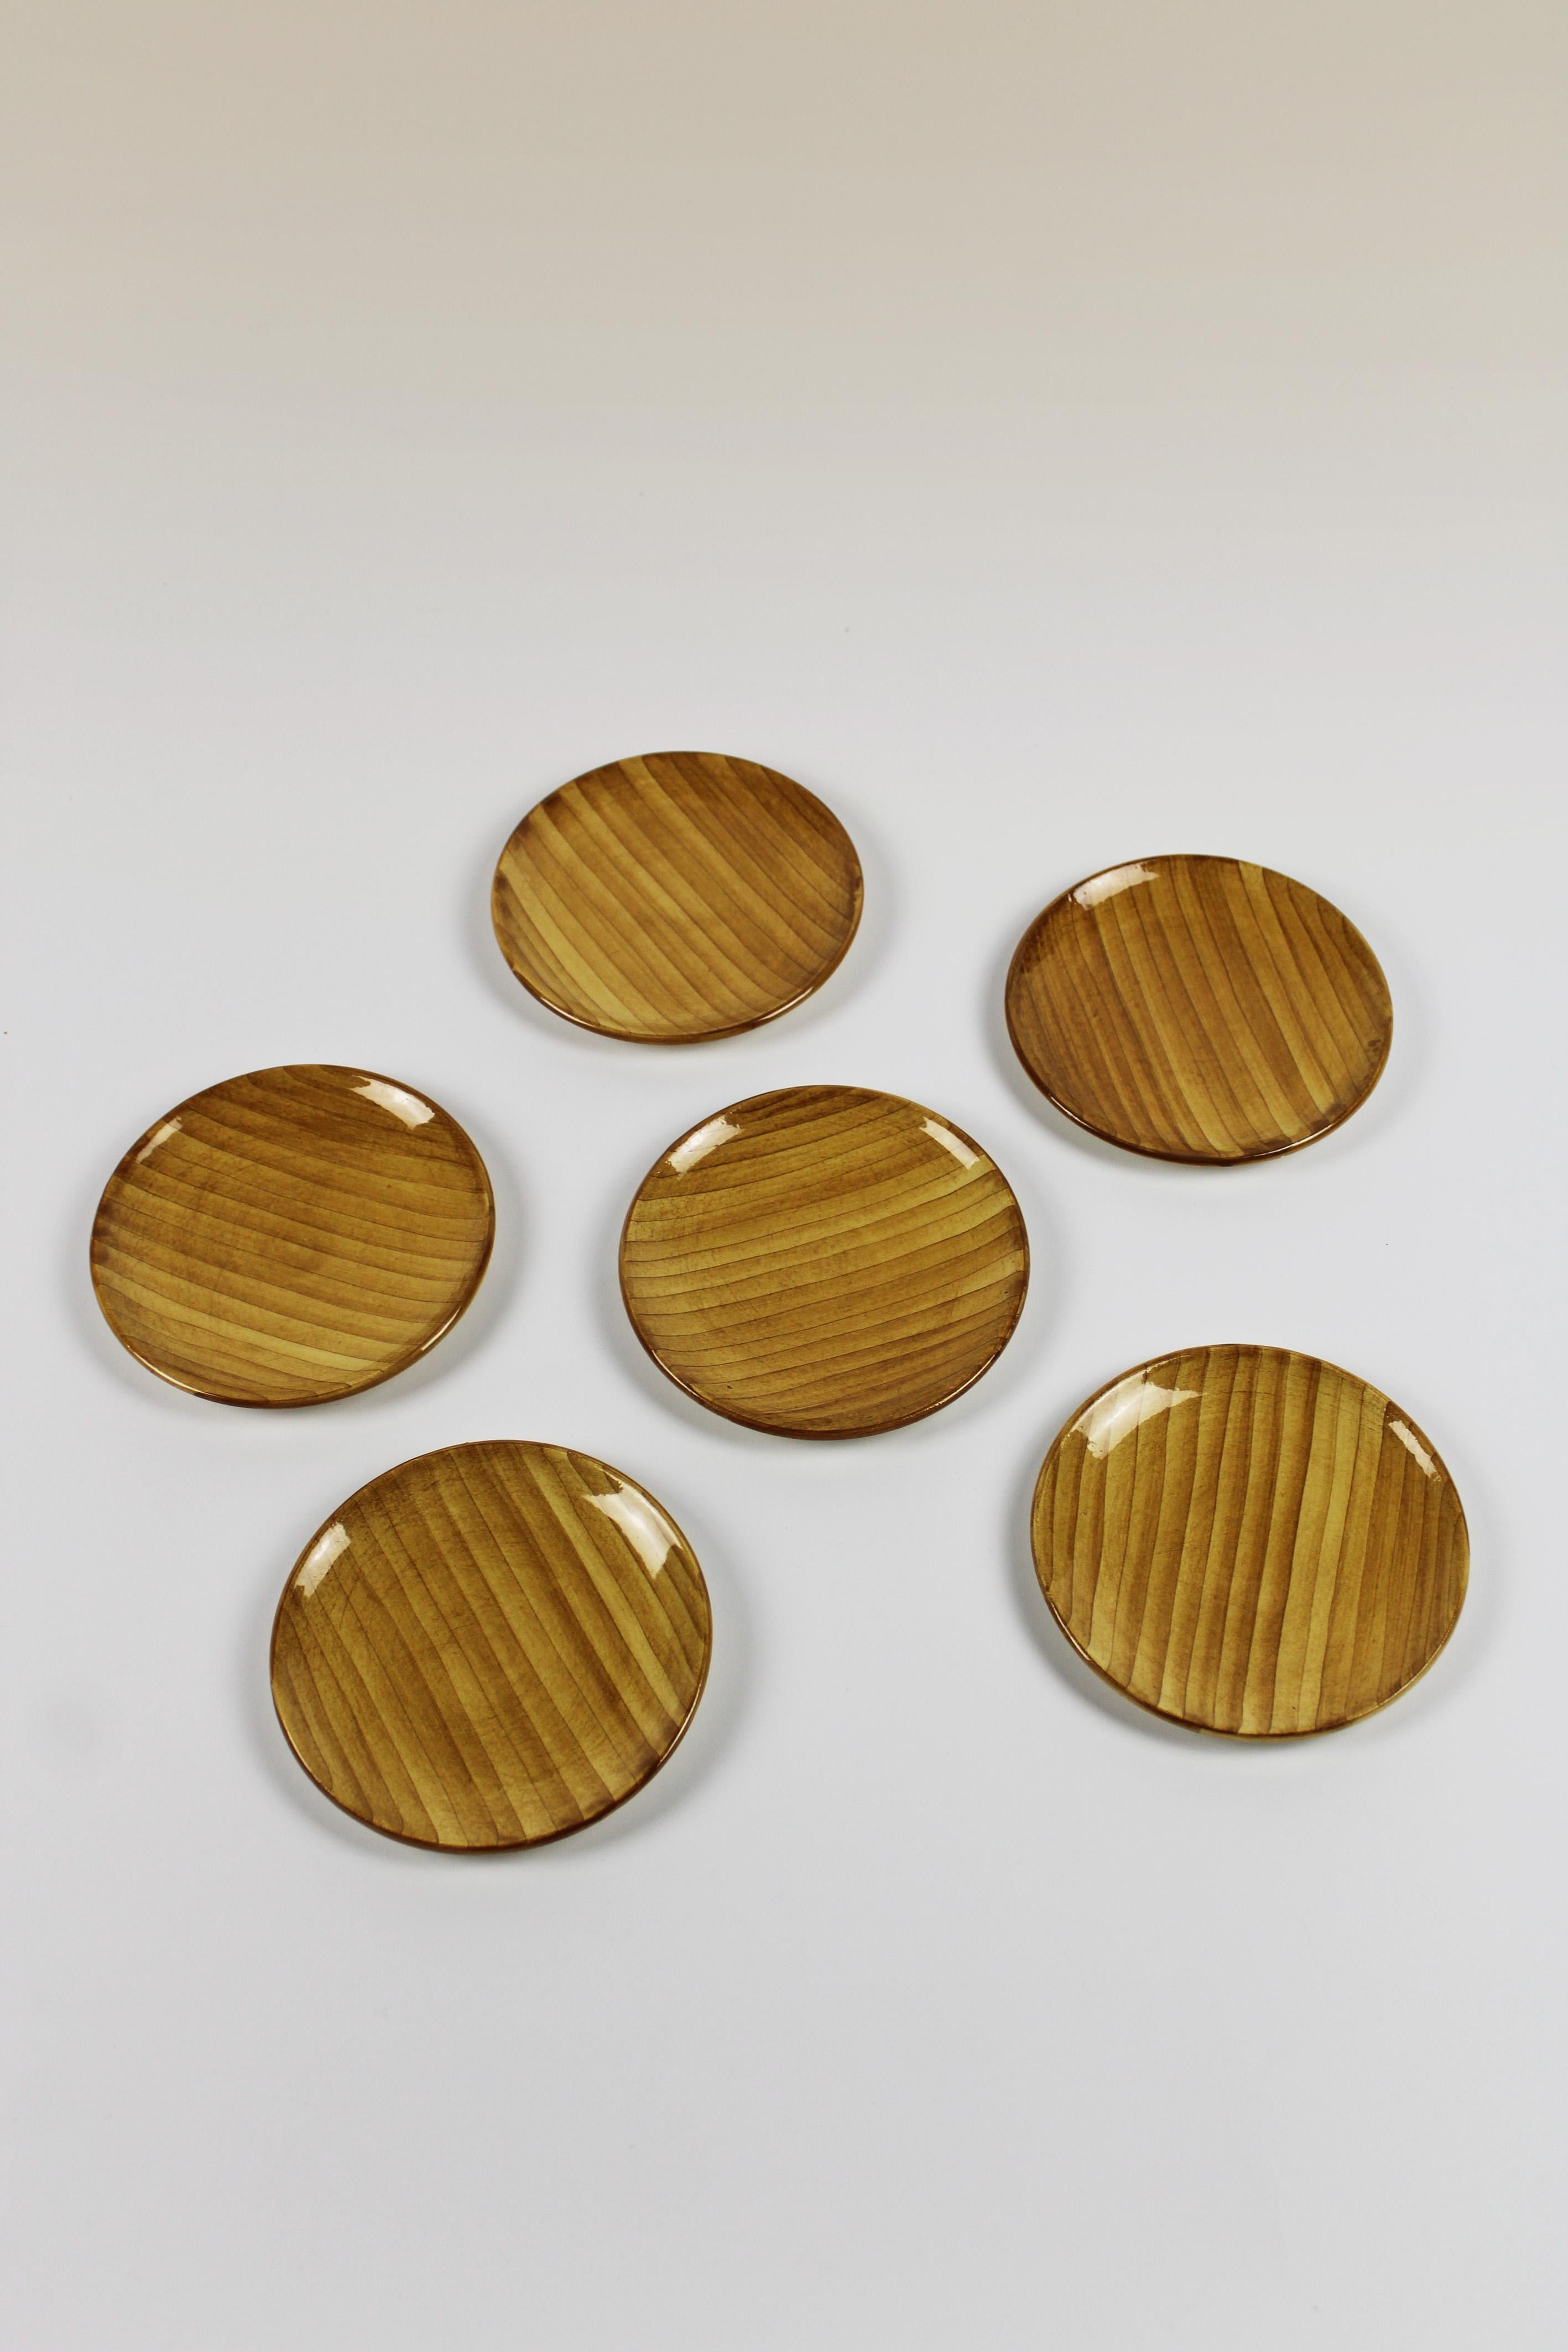 Experience the vintage elegance of mid-century France with this exquisite set of 6 coasters from Vallauris Grandjean Jourdan, originating from the 1960s. Crafted with care and attention to detail in France, these ceramic coasters feature earthy